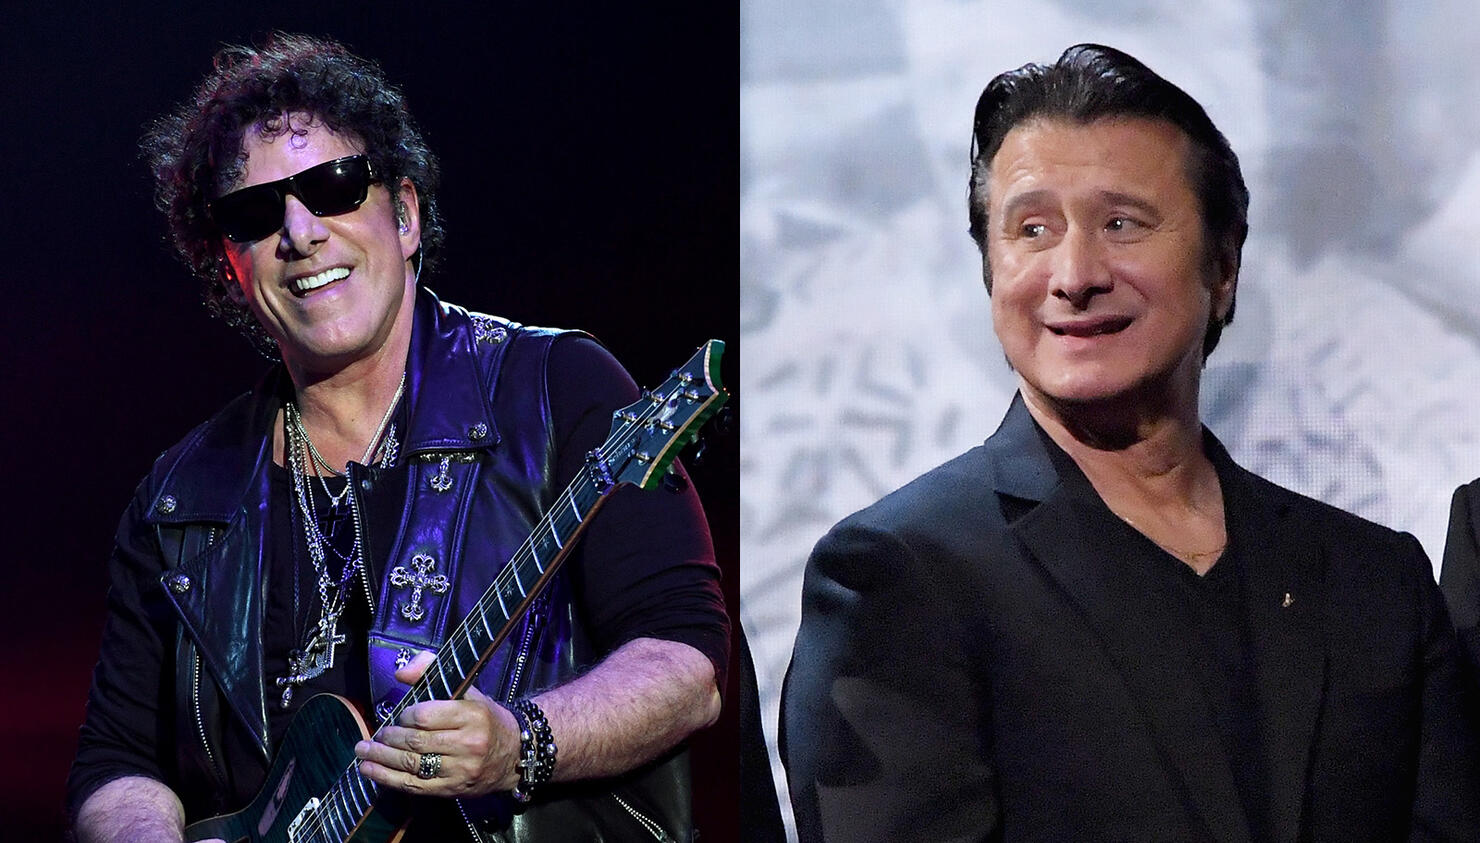 Neal Schon Invites Steve Perry to Join Him on Solo Tour